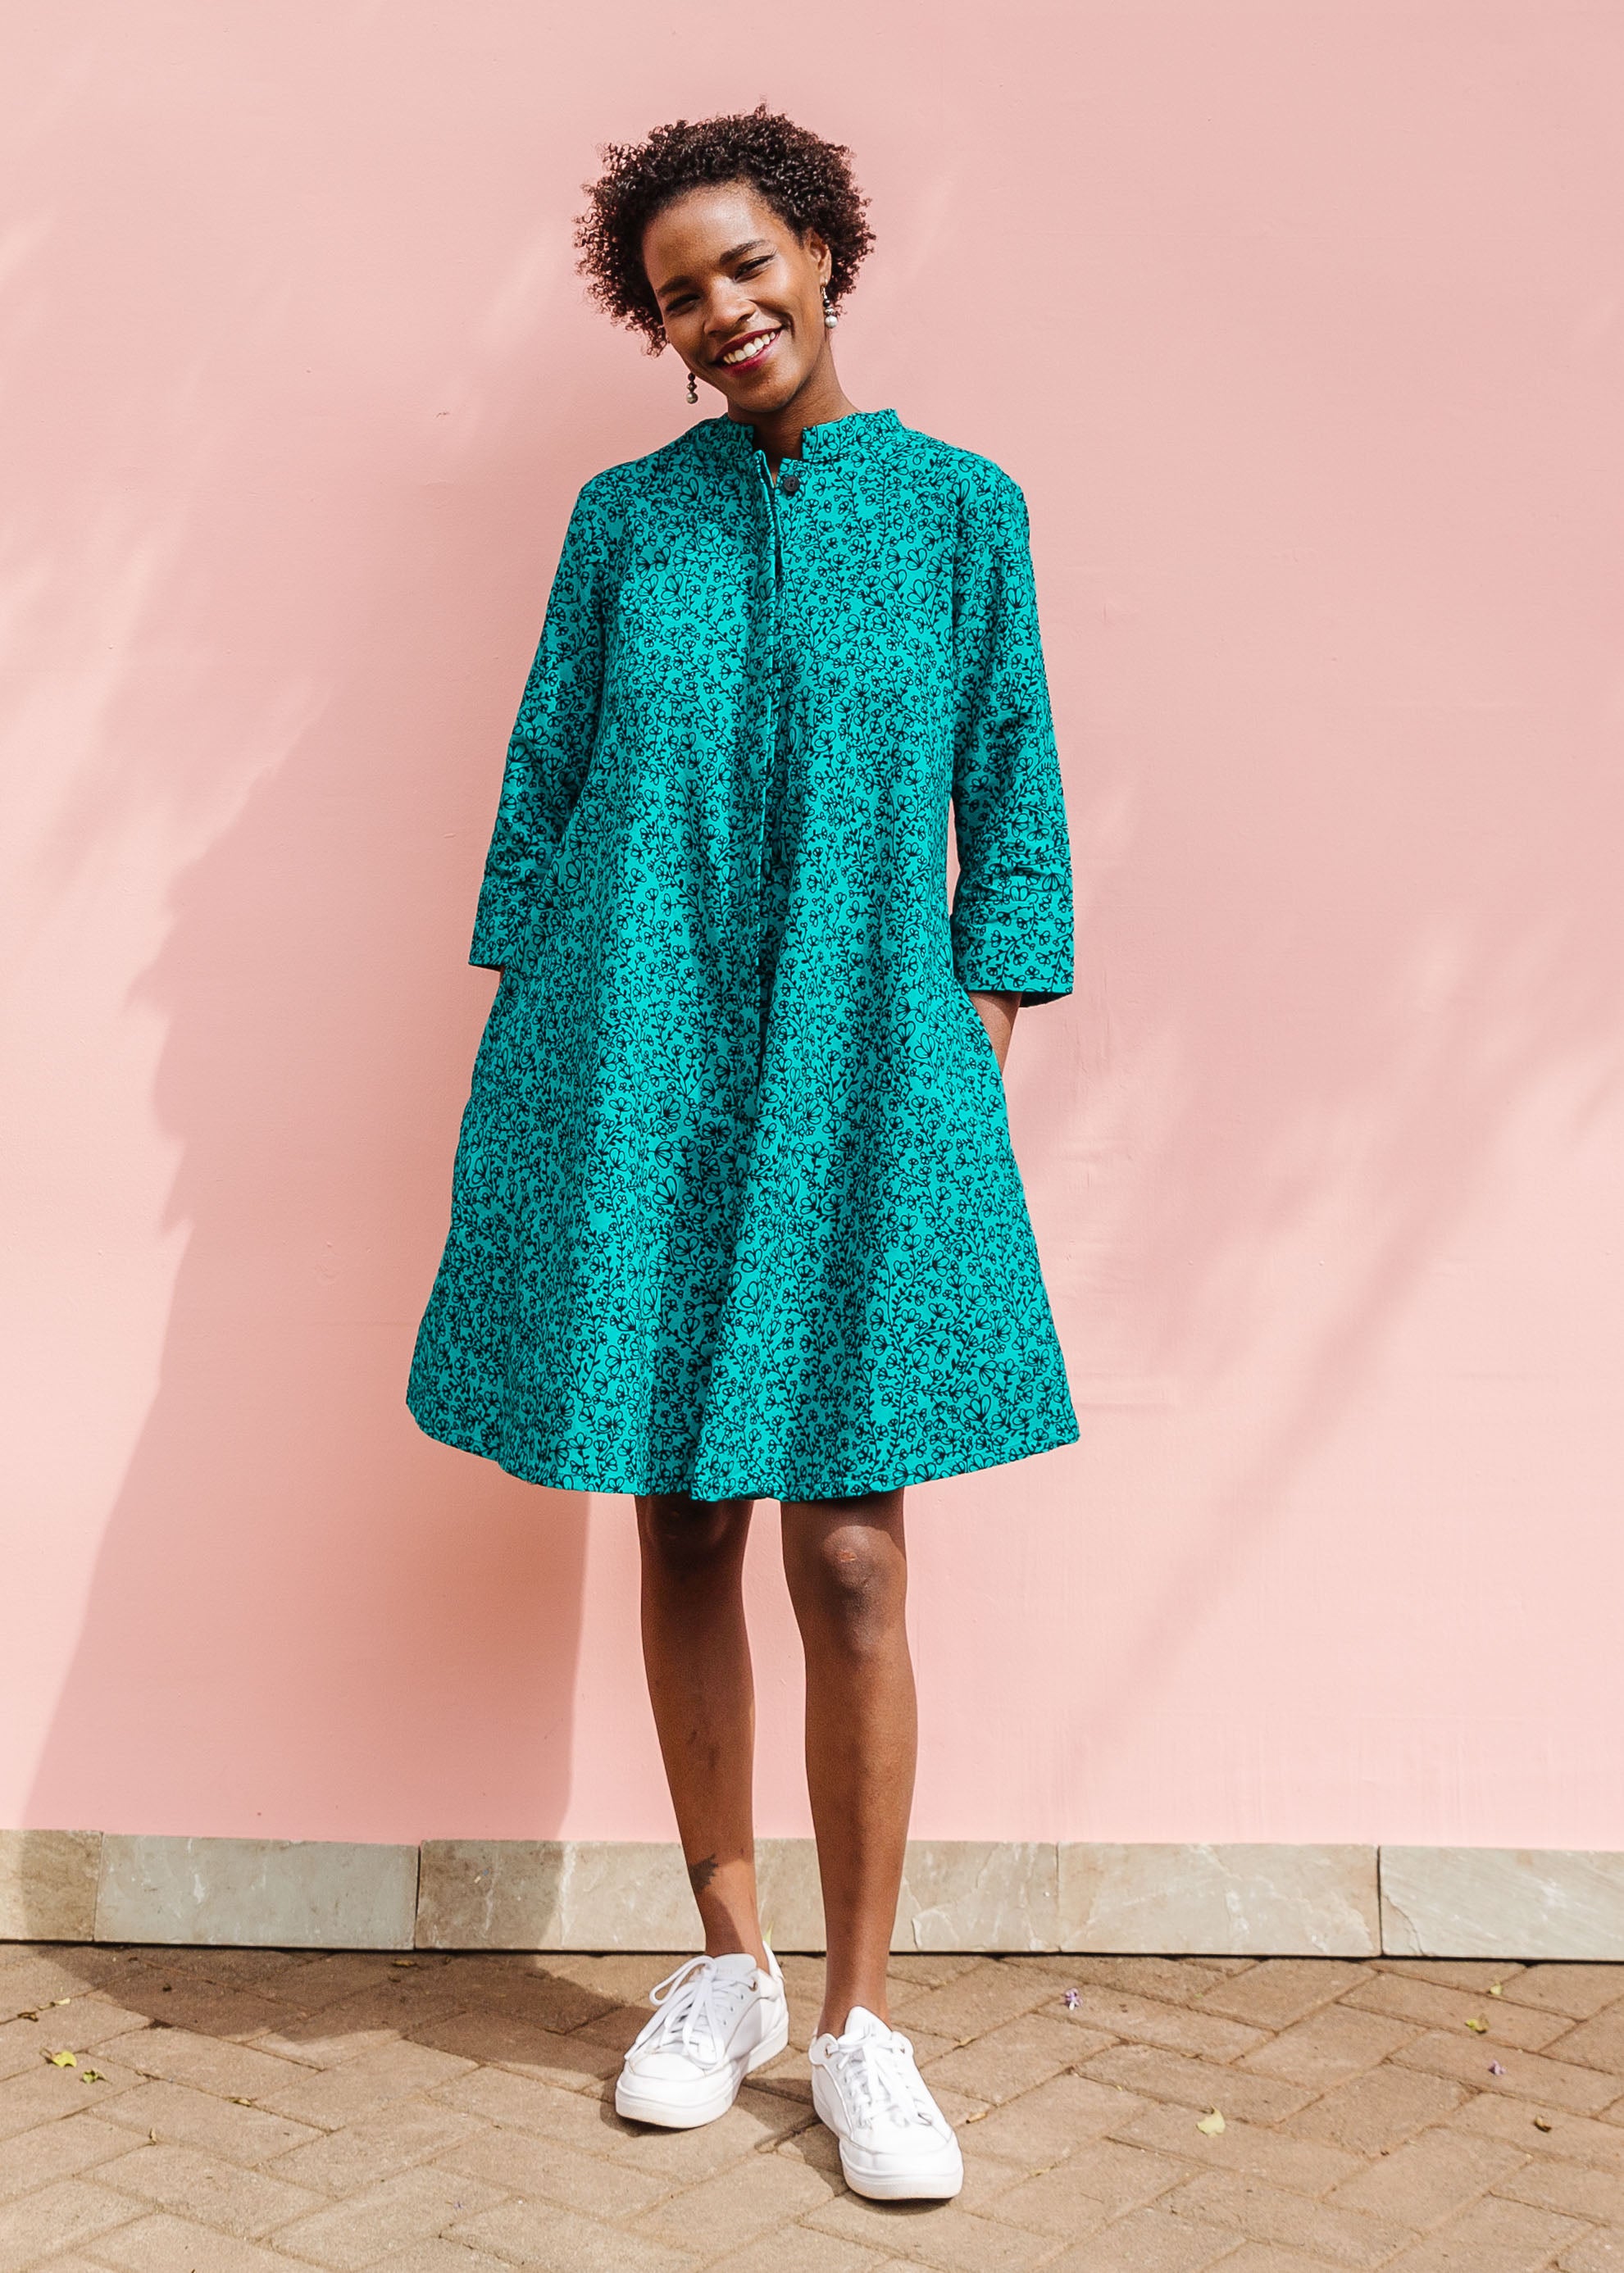 Model wearing turquoise dress with small black vine print.